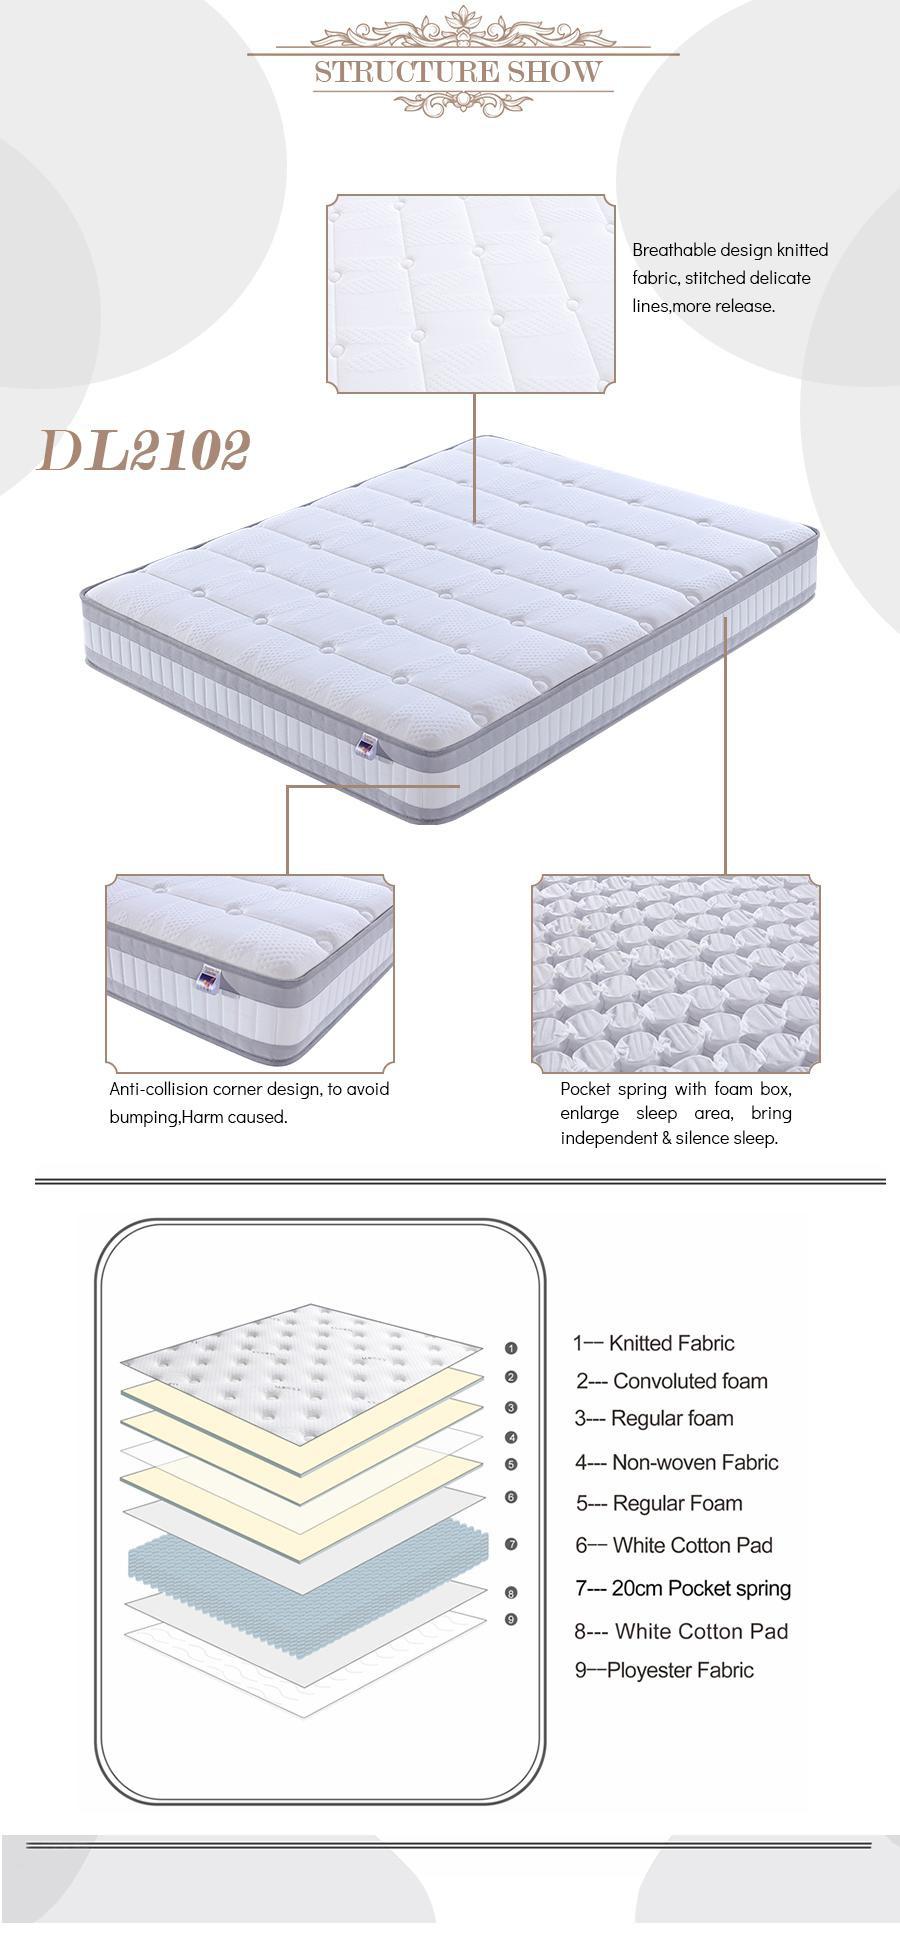 Customized New Dreamleader/OEM Compress and Roll in Carton Box Simmons Comfort Layer Mattress